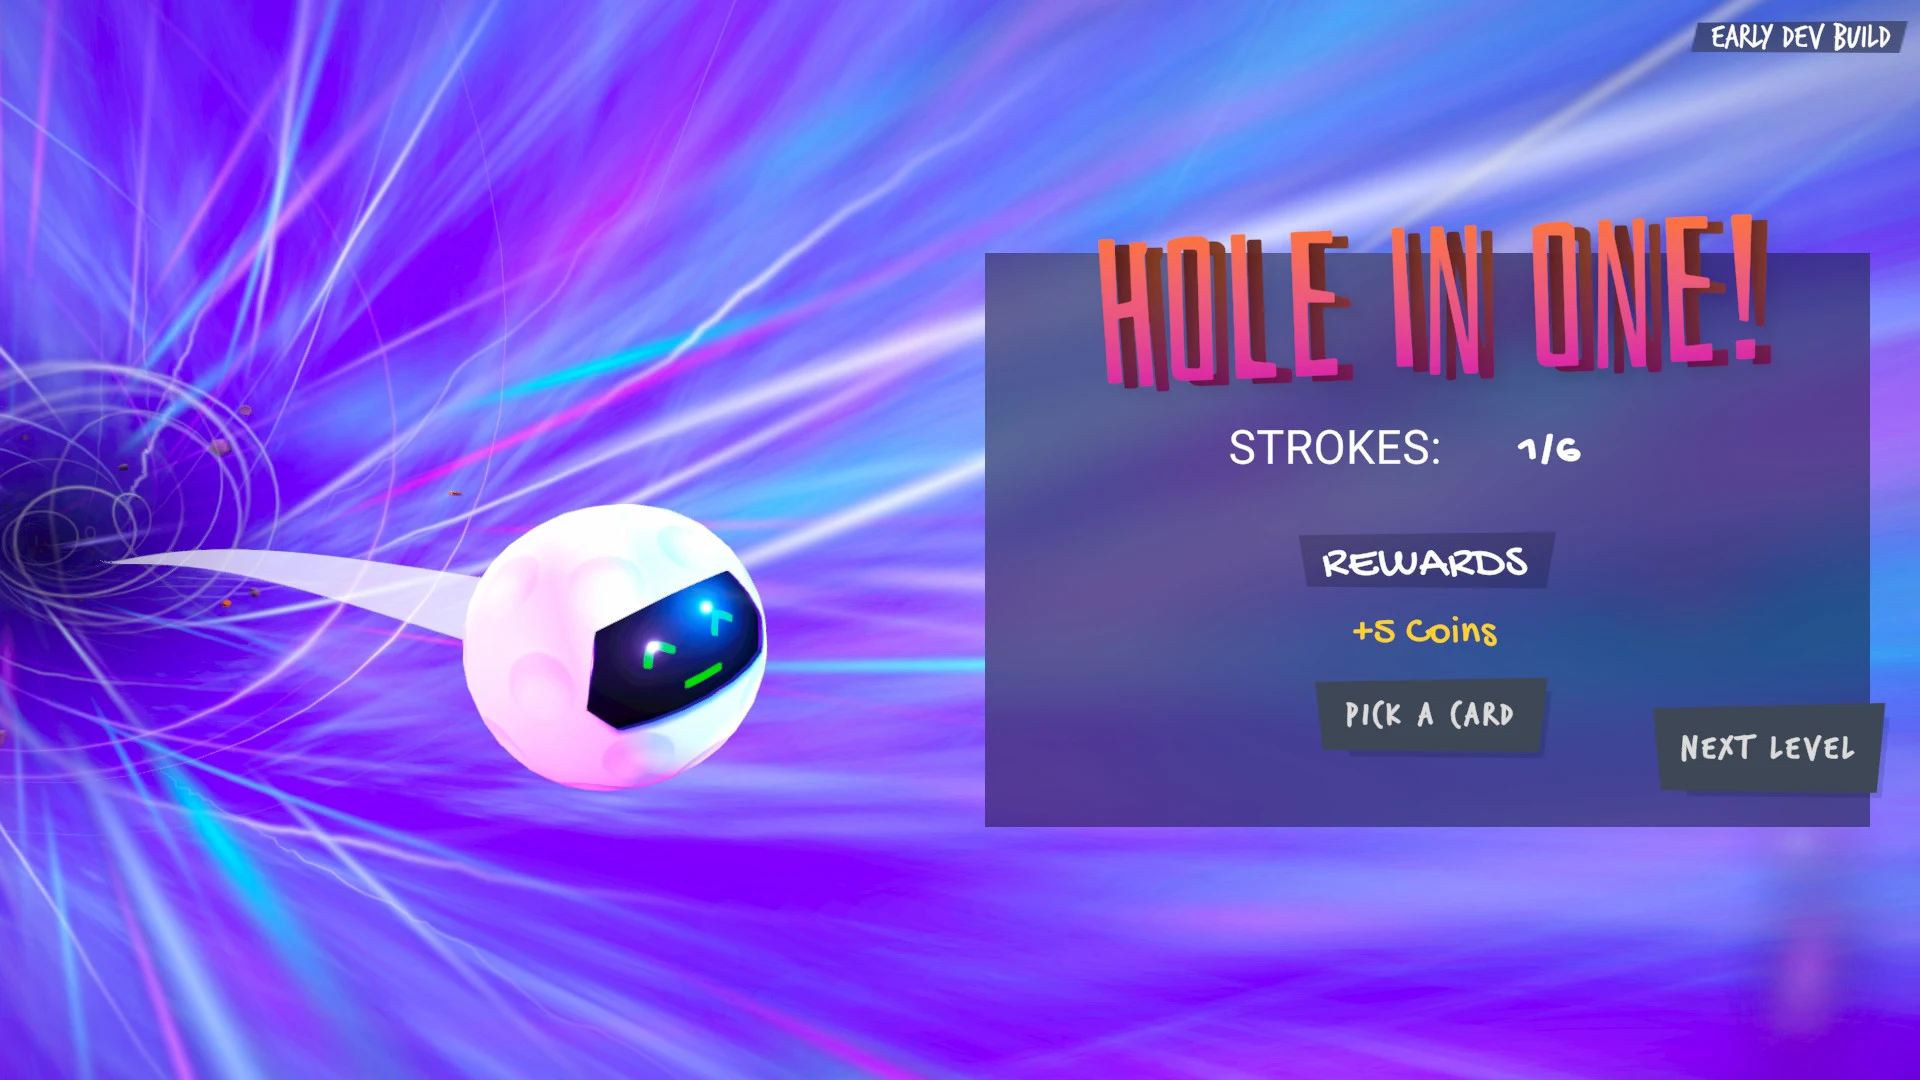 Loading screen after getting a hole in one